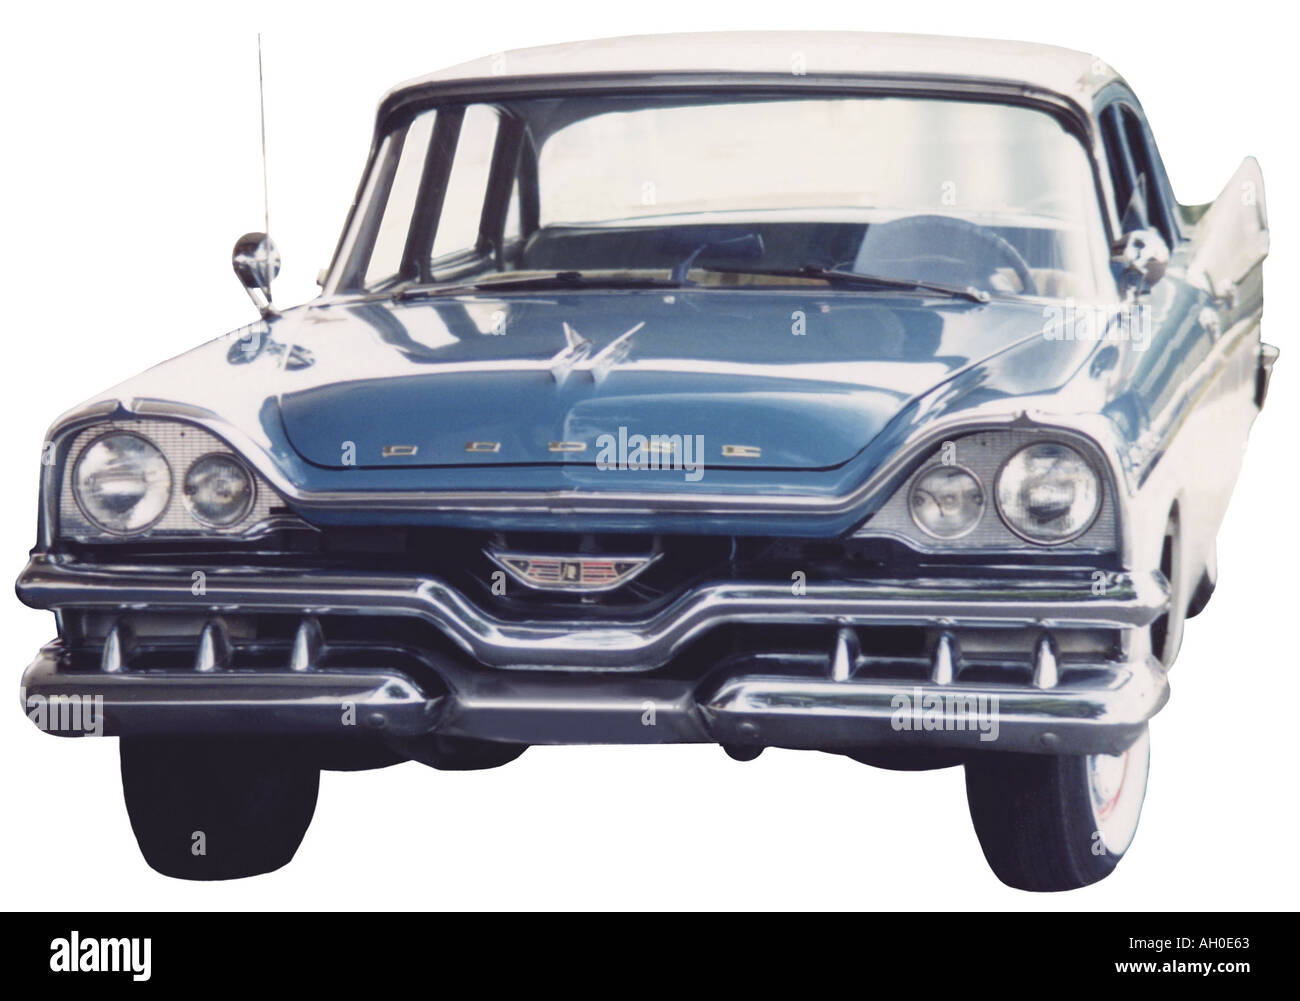 1957 Brilliant Blue Dodge Royal Hardtop with whitewall tires Stock Photo